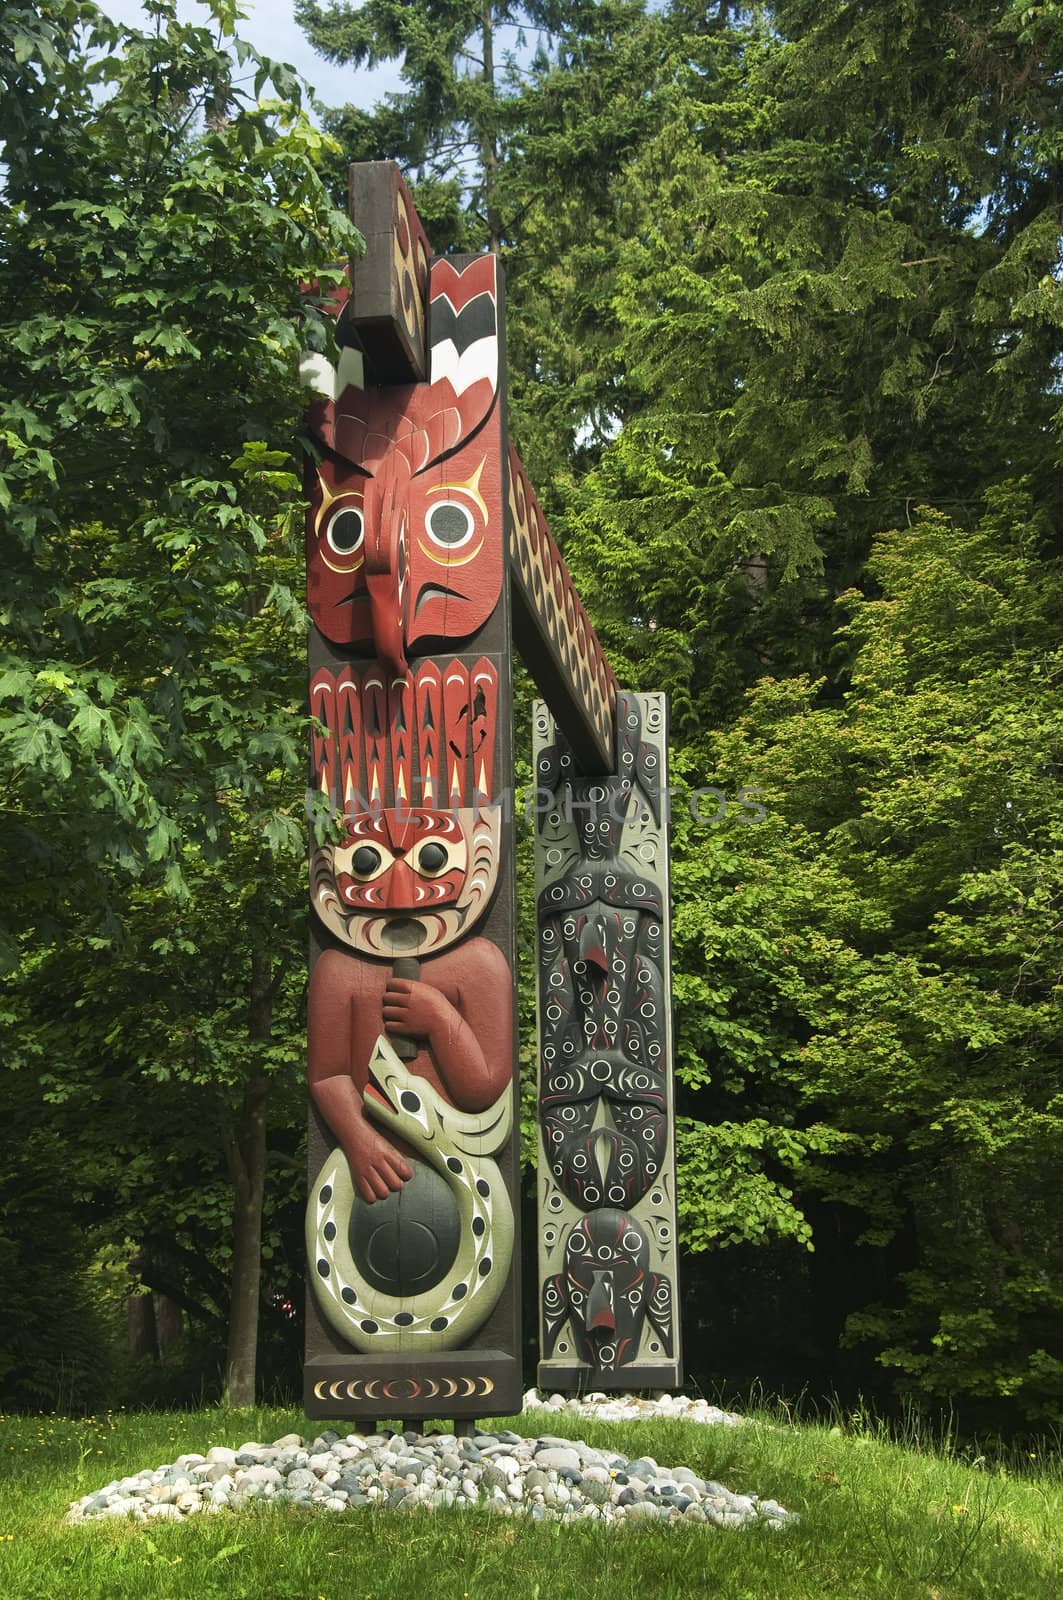 totem park at the PROVINCIAL MUSEUM,Vancouver, Canada